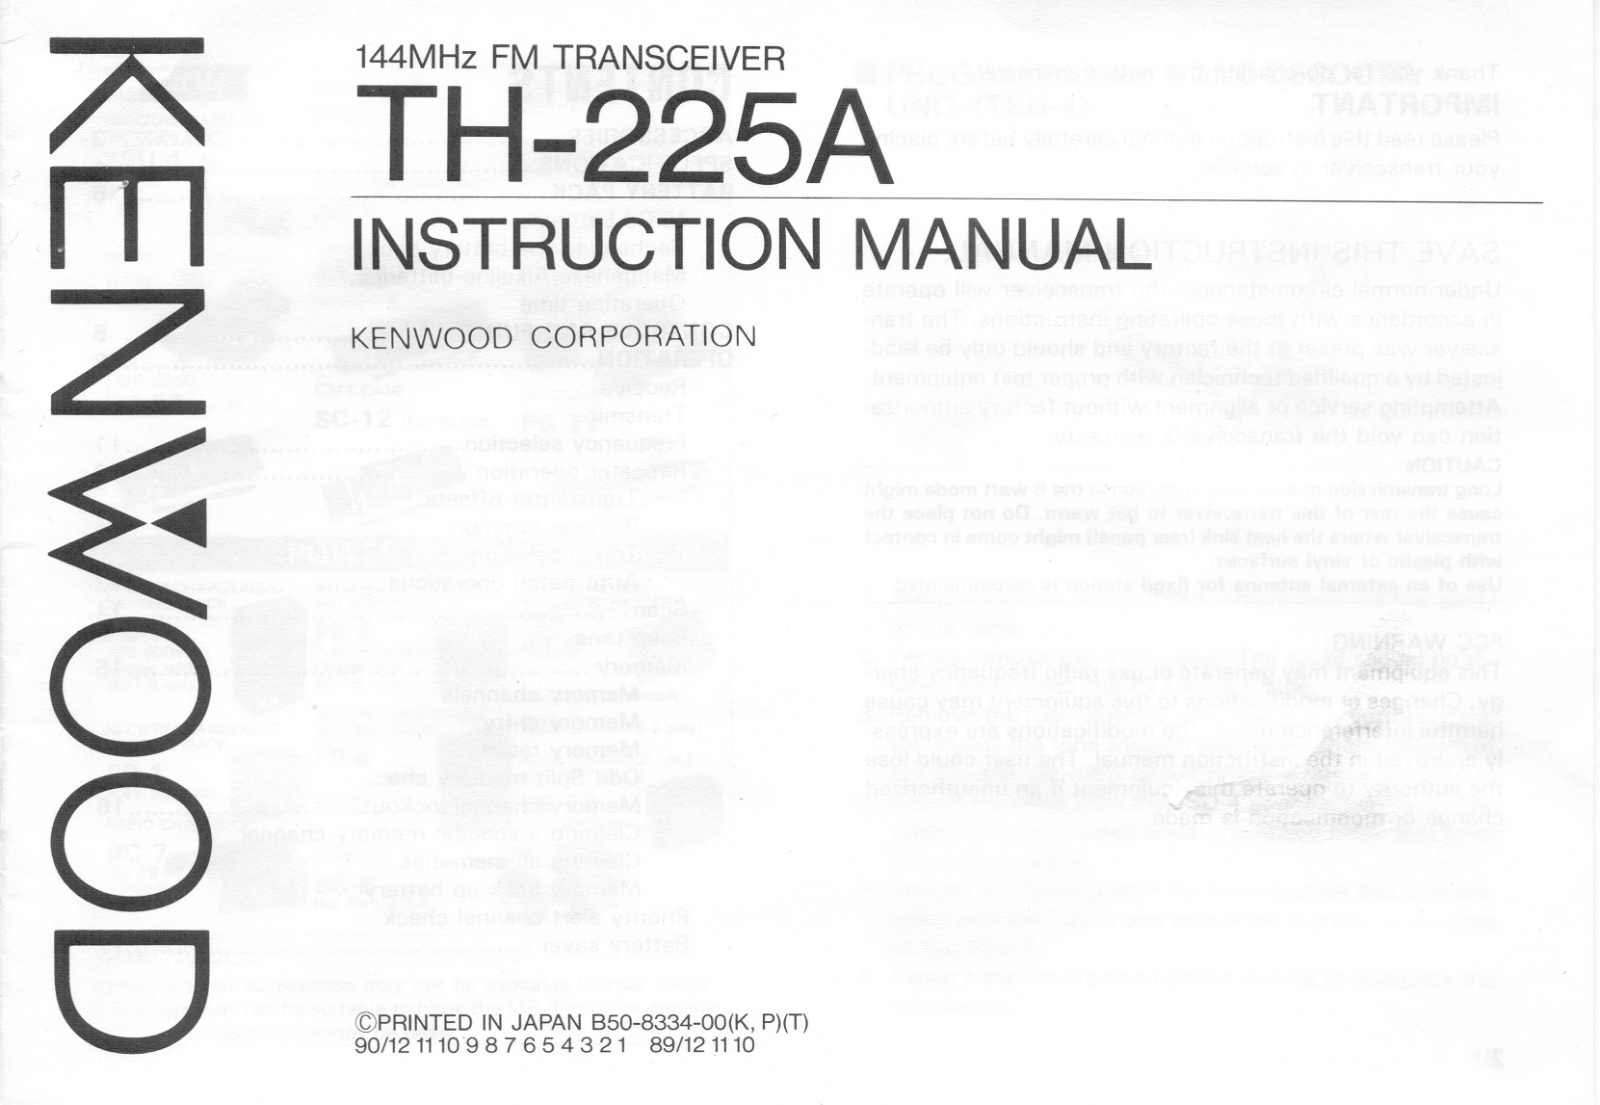 Kenwood TH-225A Owner's Manual